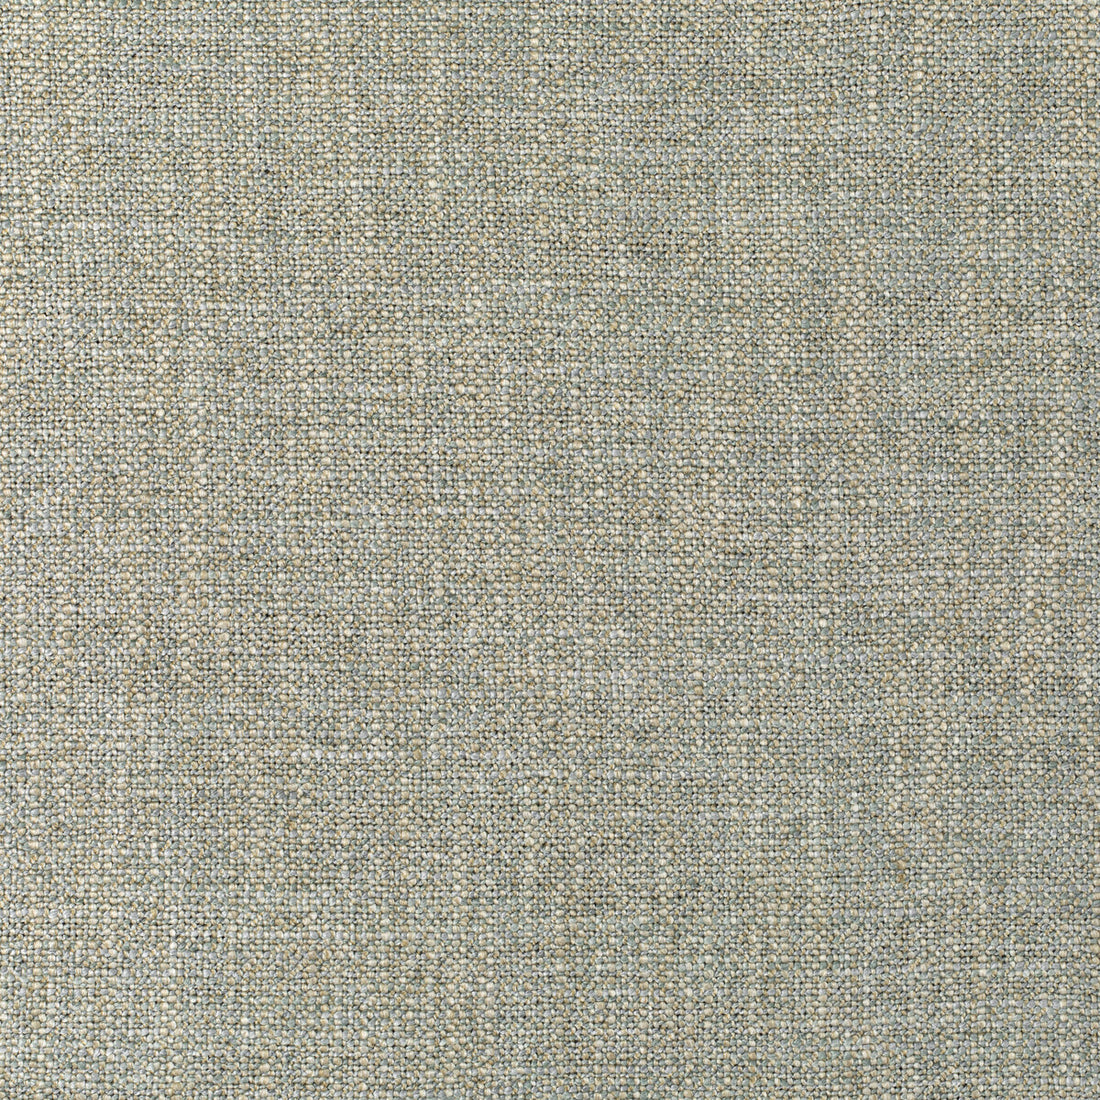 Pasaro fabric in natural color - pattern 35904.13.0 - by Kravet Couture in the Linherr Hollingsworth Boheme II collection